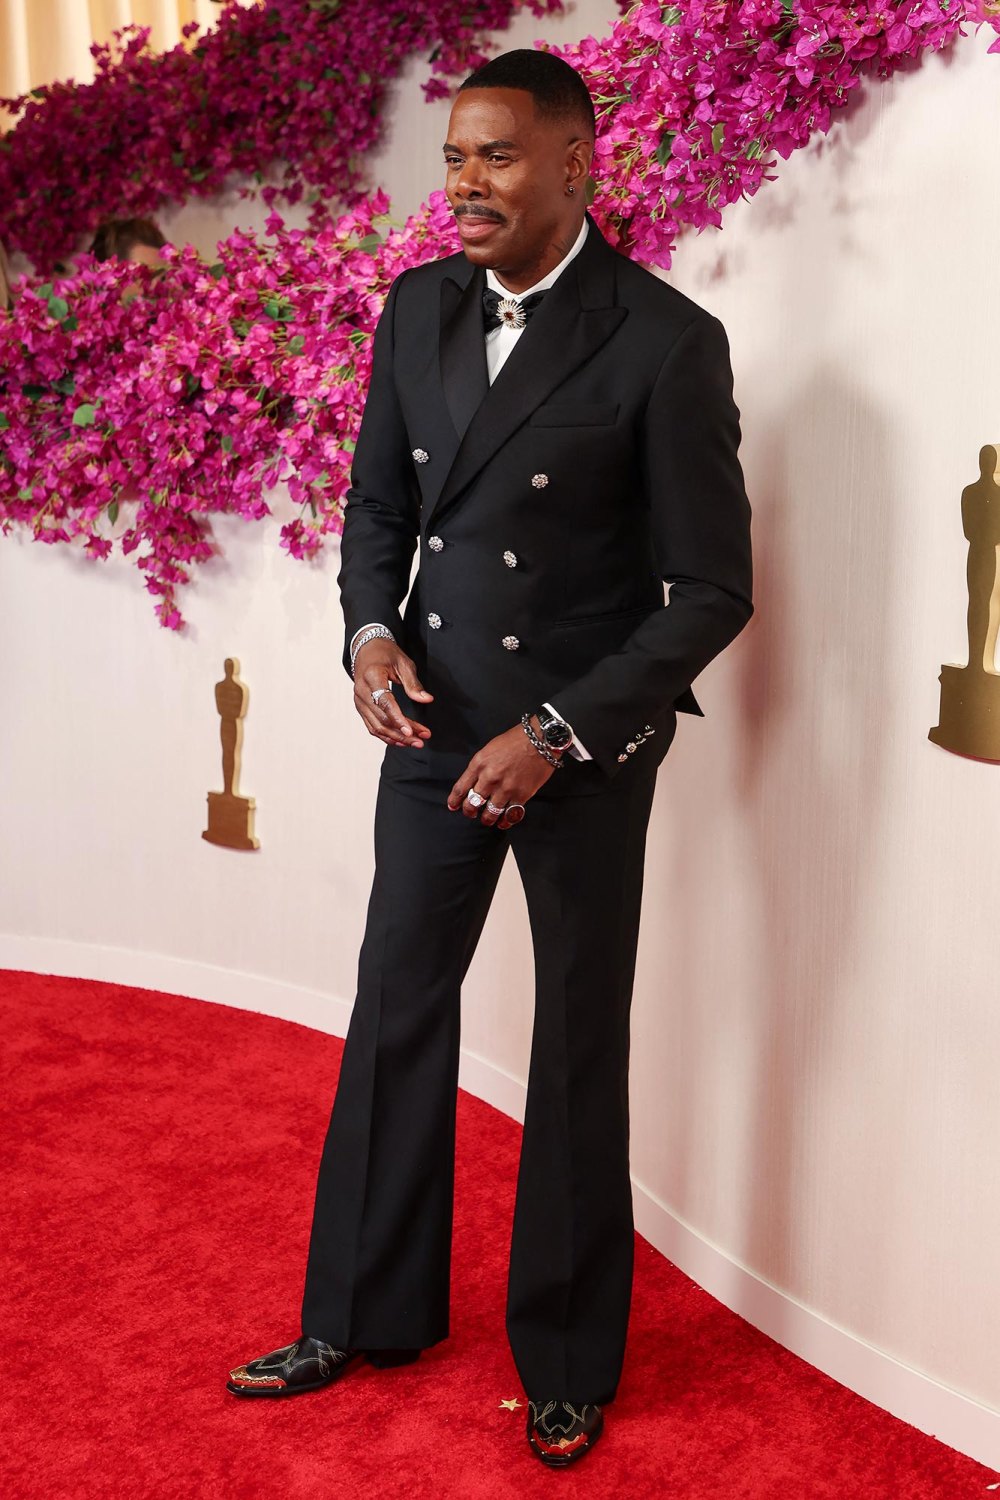 Colman Domingo Adds a Western Flair to the Oscars Red Carpet With Gold-Tipped Cowboy Boots